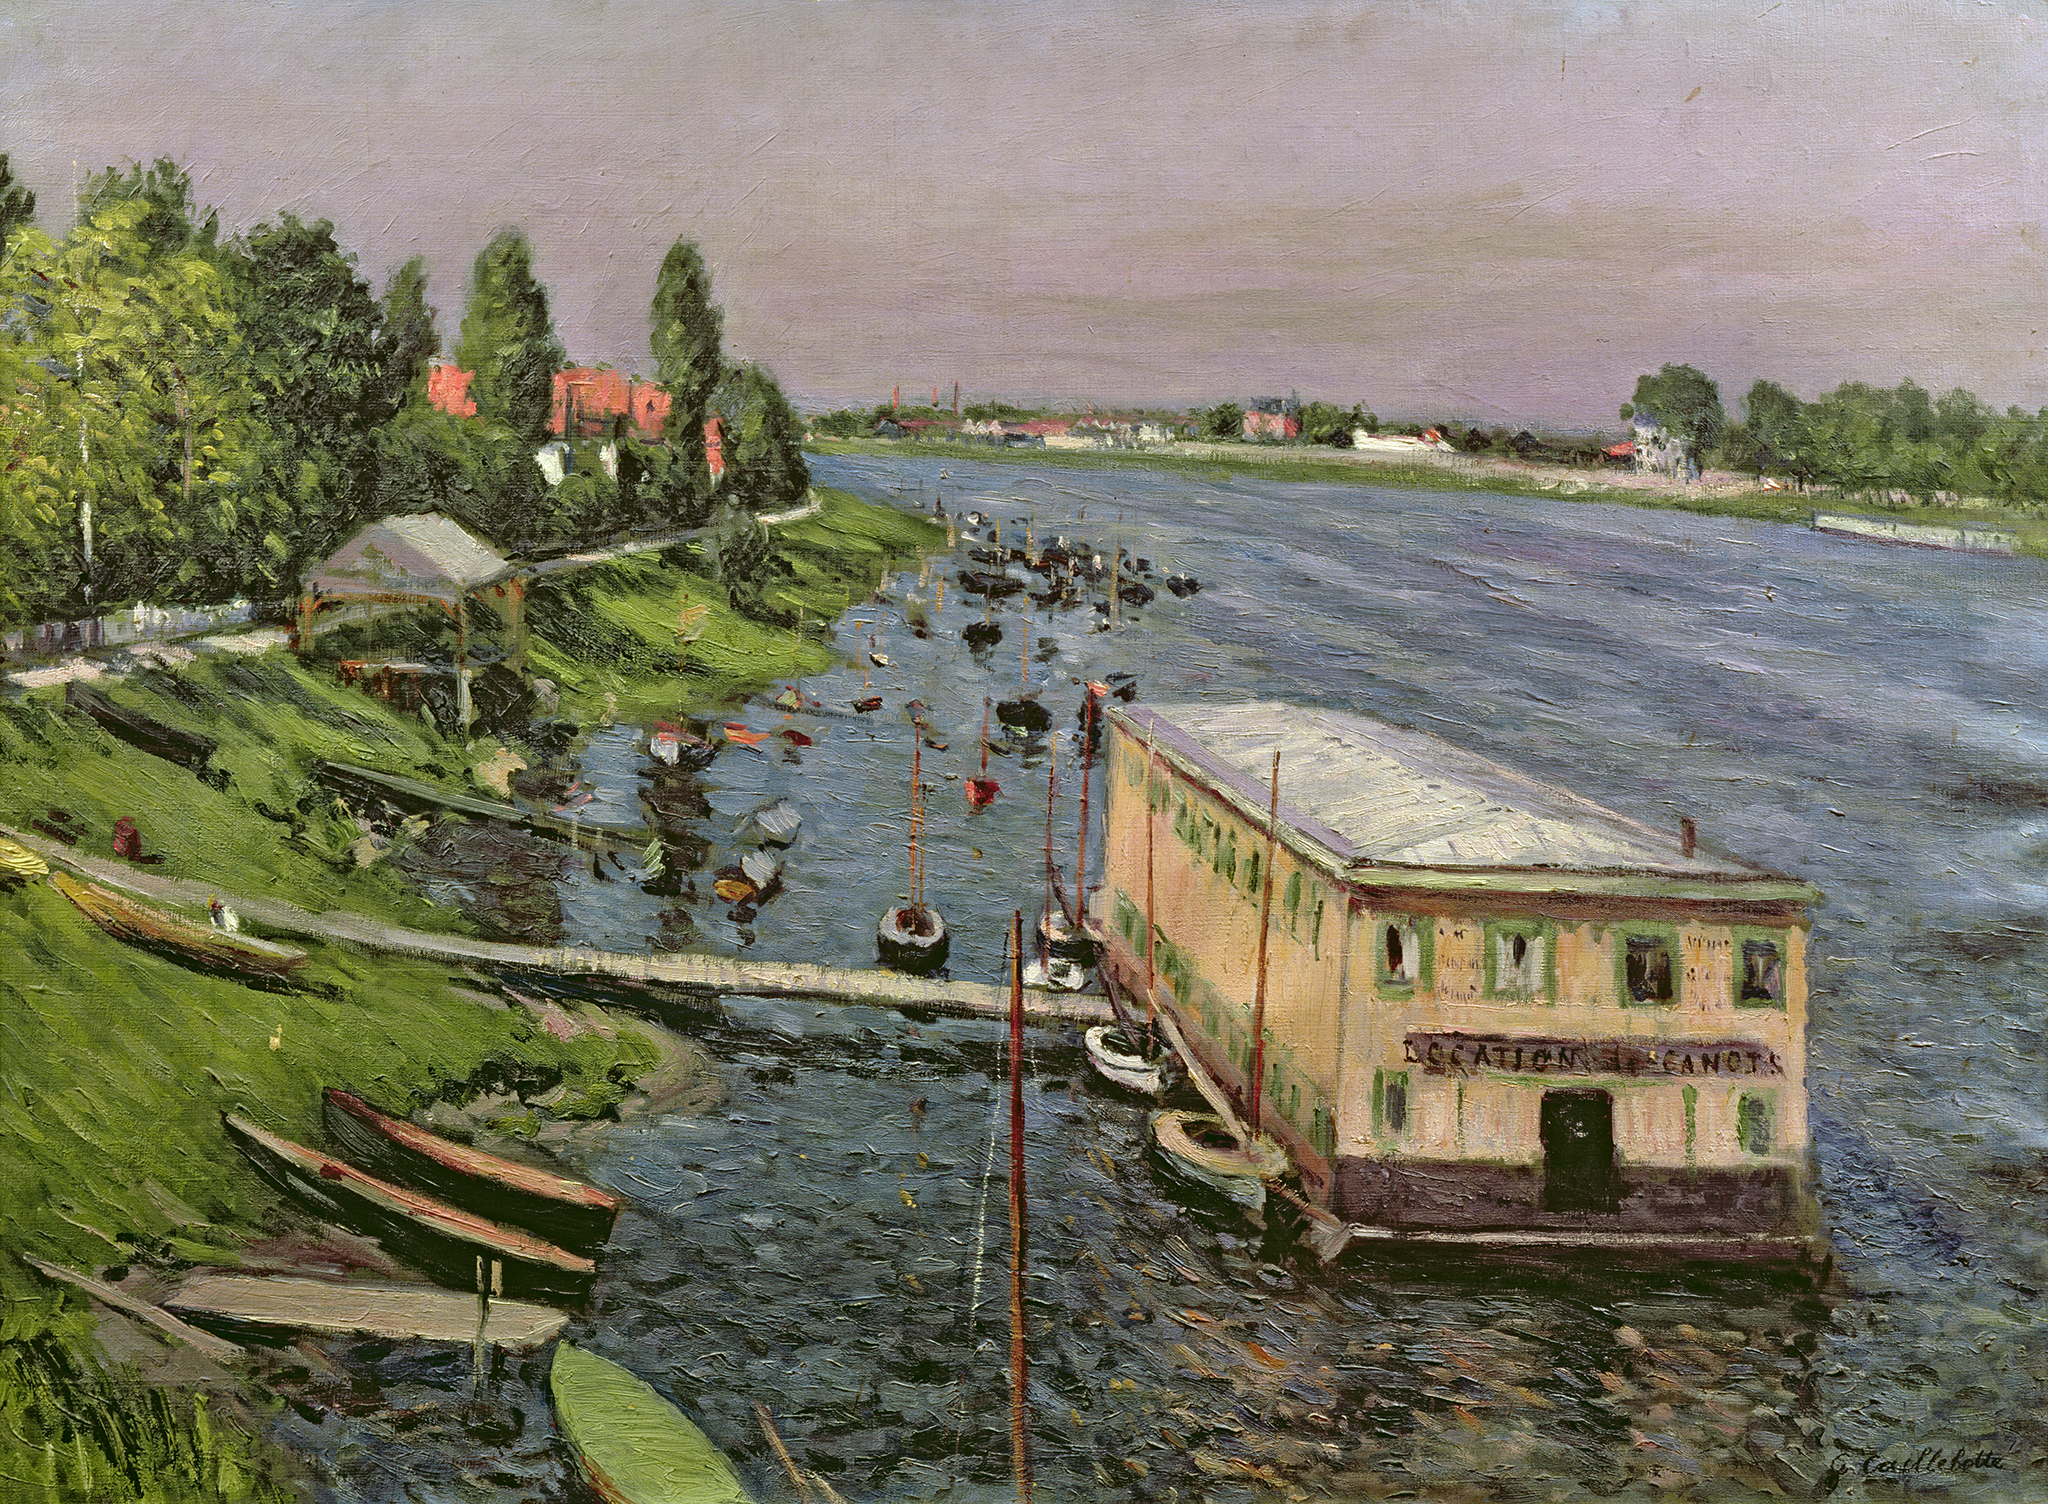 A painting of a large yellow building with a white roof floating on a pontoon in a wide river. Dozens of empty boats are docked along it and the green bank or shoreline to the left. Above it, there is a white path wrapping around large green trees towards a set of buildings with red roofs. In the background across the river seems to be more buildings along with forests filled with green trees. This all lays under a gray and purple sky.